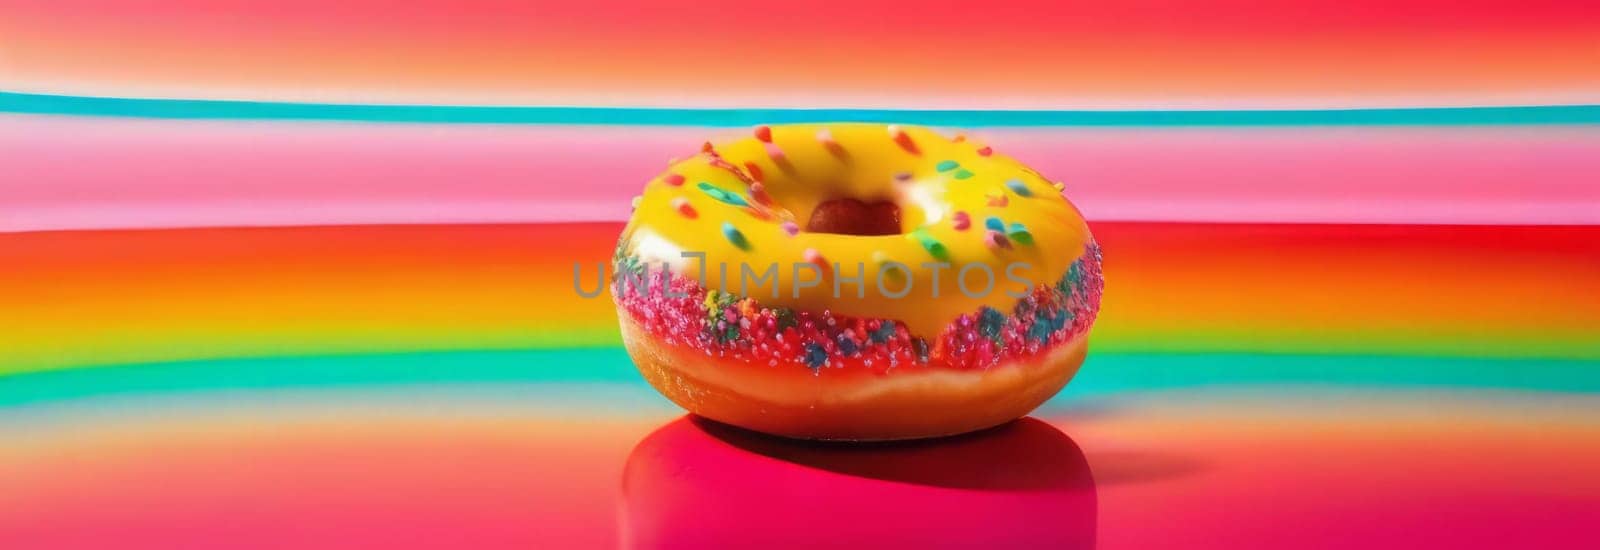 Freshly baked donut topped with generous amount of rainbow-colored sprinkles drizzled with rich sweet icing on colorful background. For culinary book, magazine, food blog, social media platforms